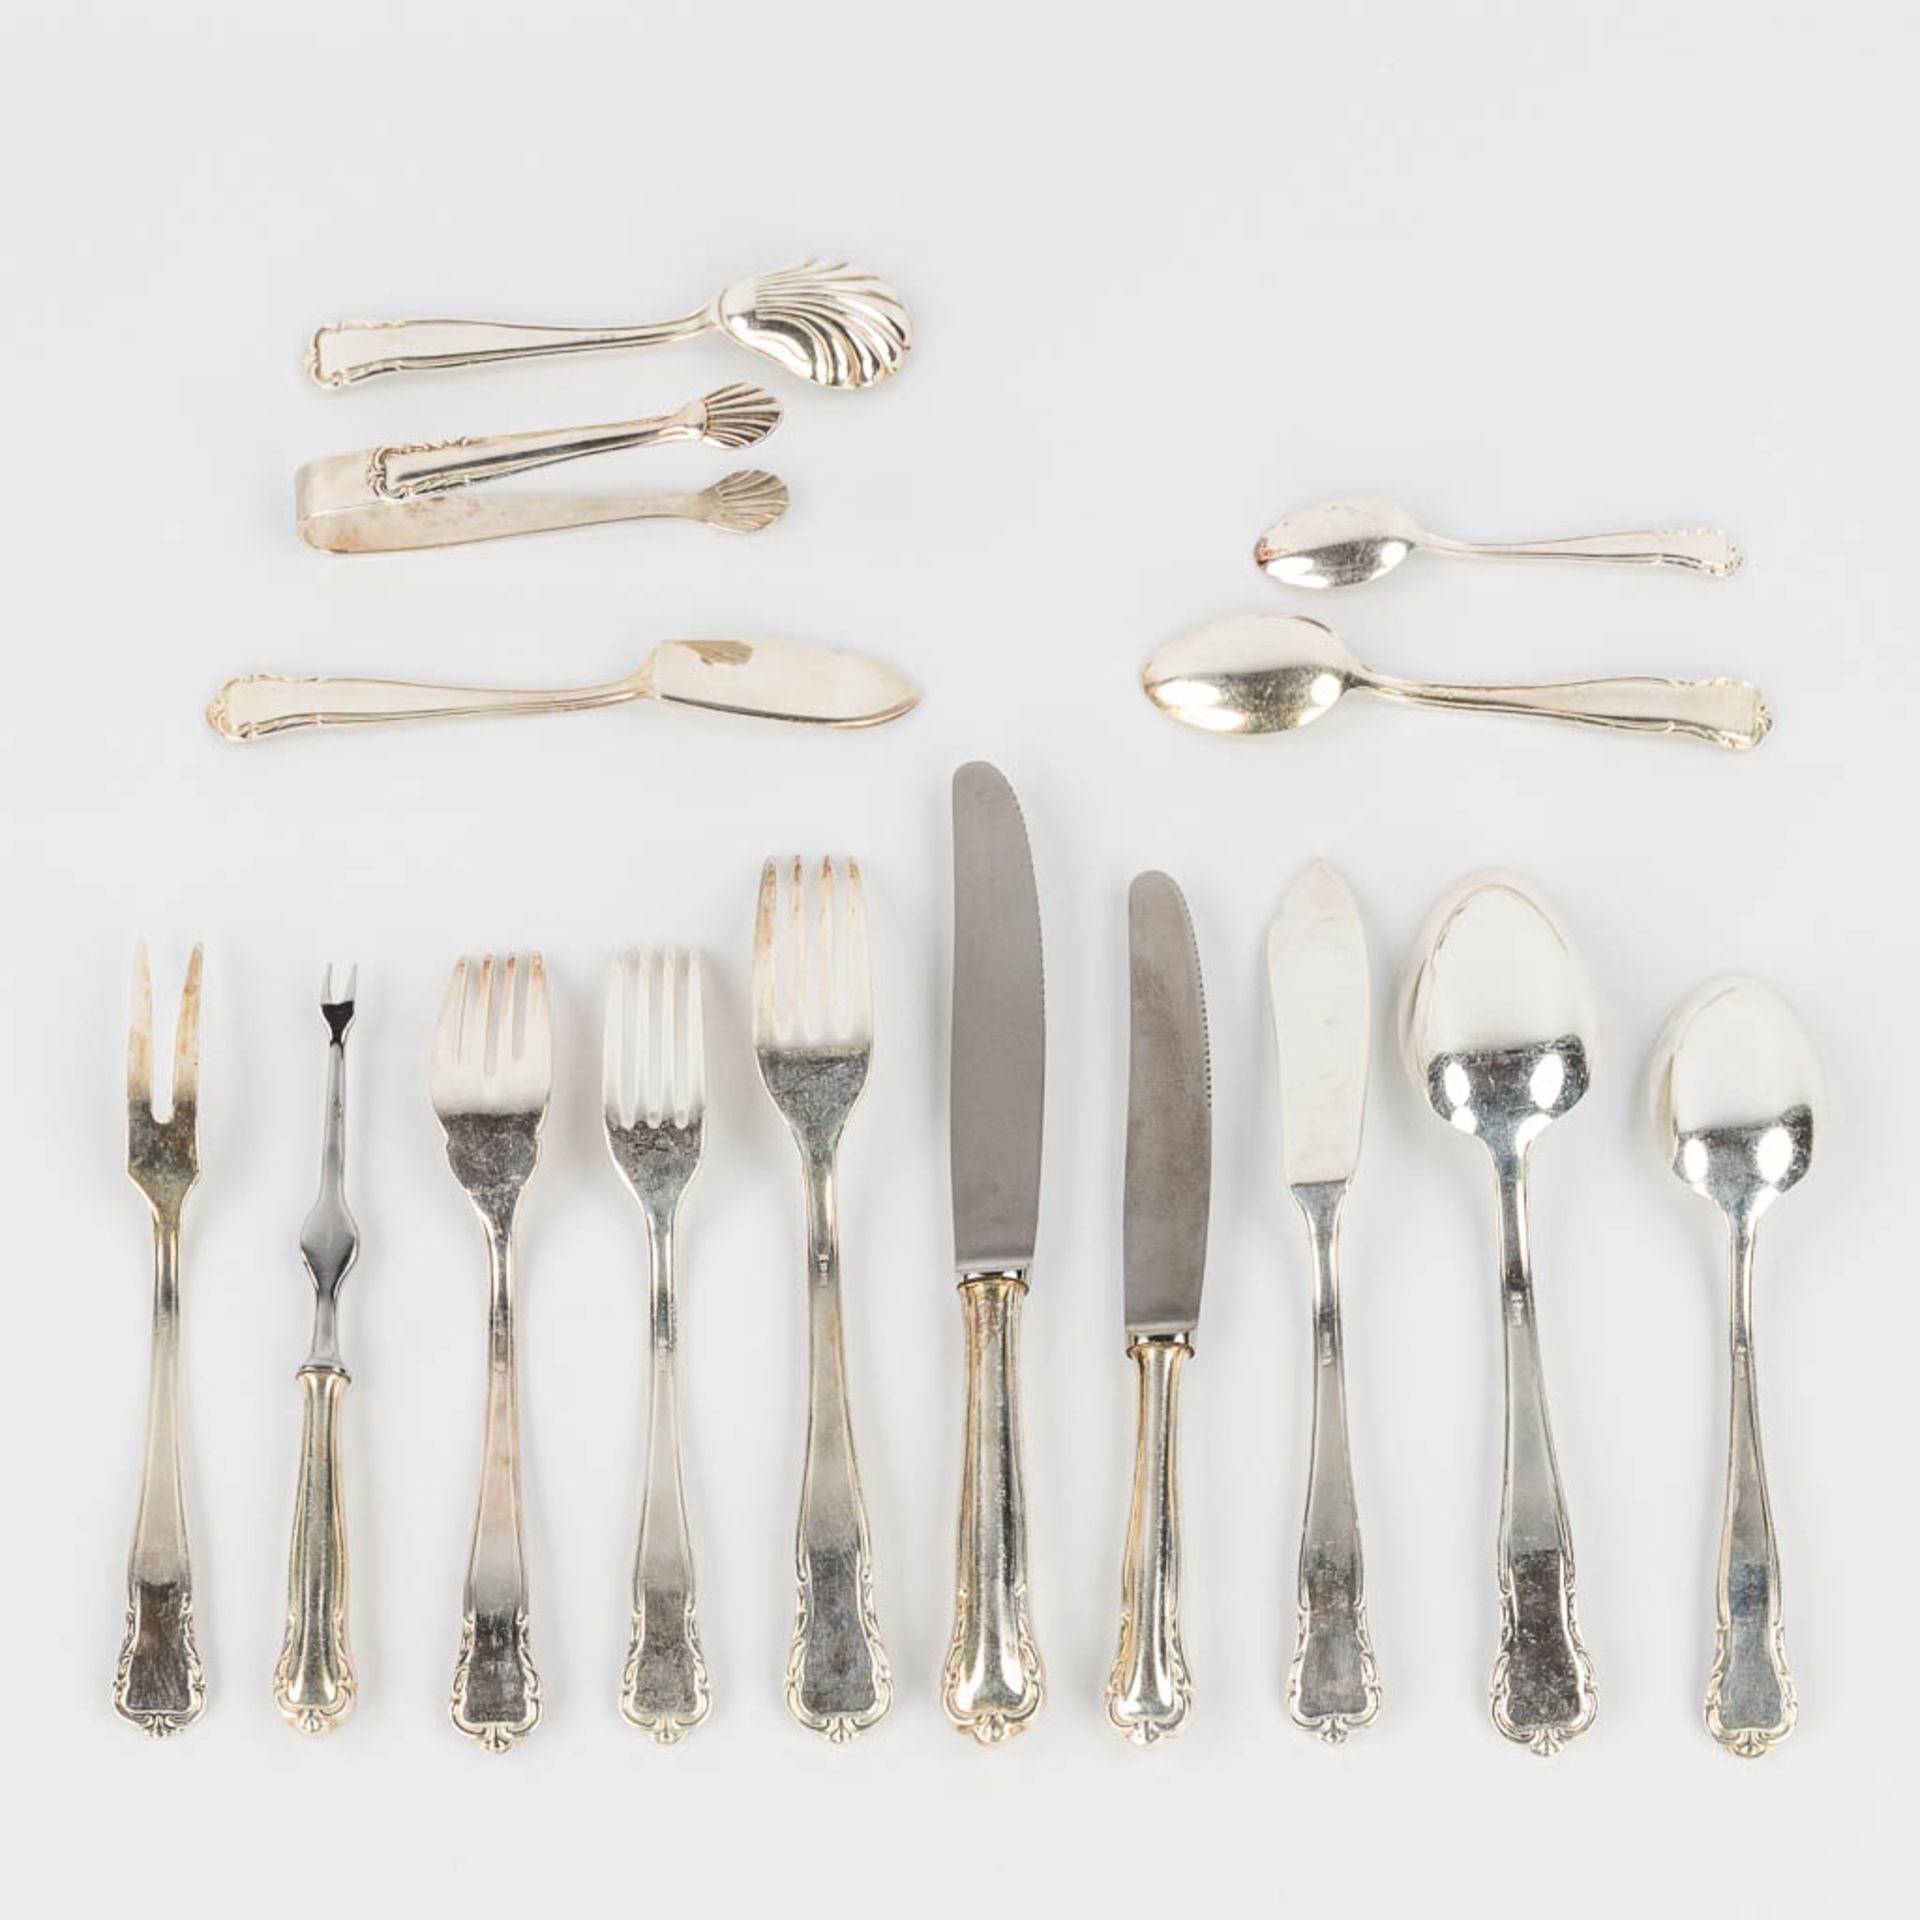 A 148-piece silver cutlery set in a chest, made in Germany. 6585g. (L:34 x W:46 x H:31 cm) - Image 8 of 12